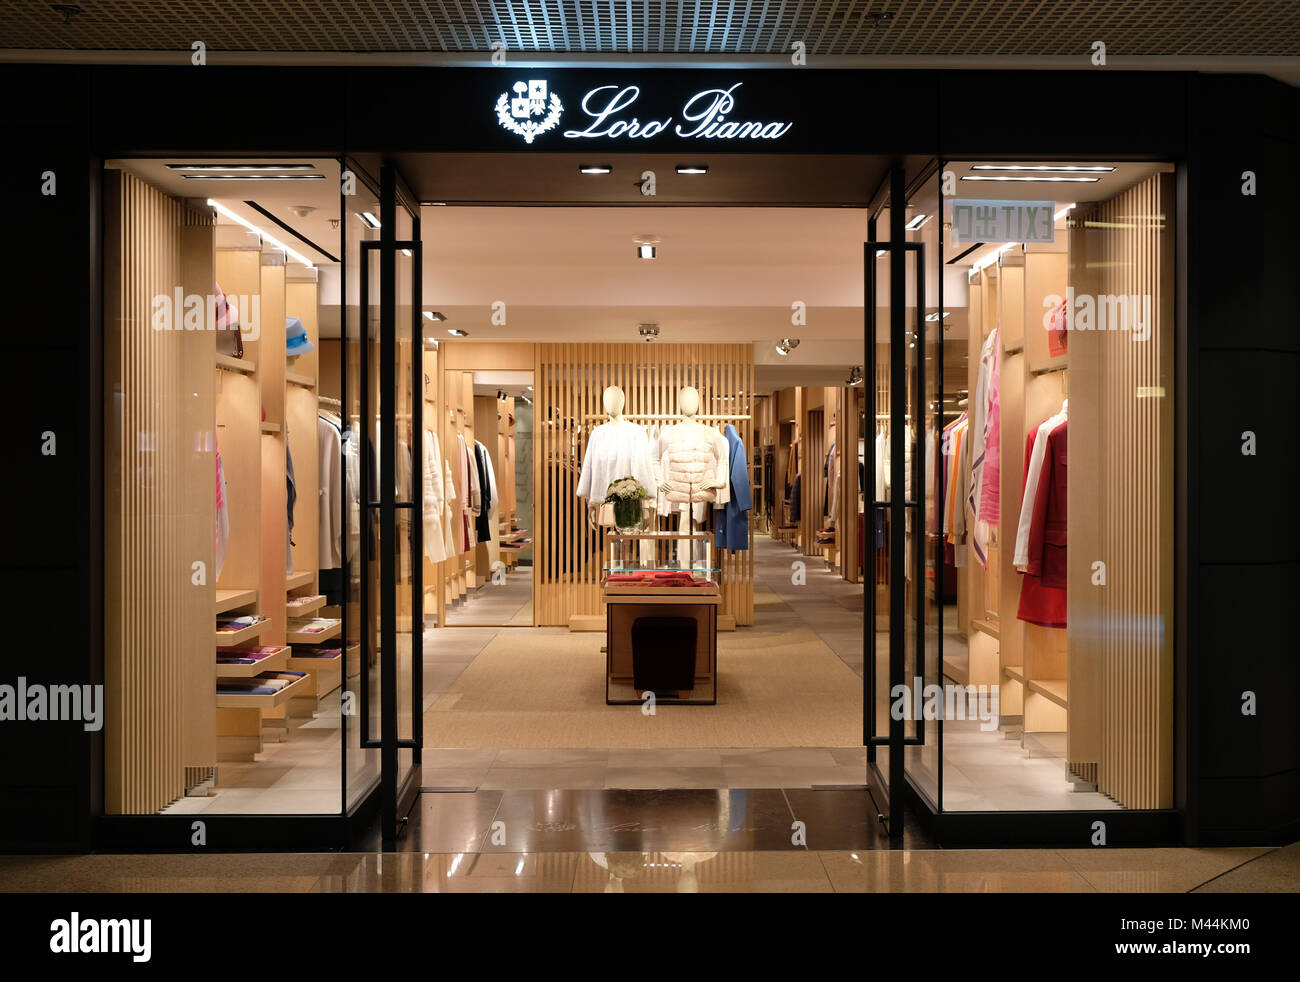 HONG KONG - FEBRUARY 4, 2018: Loro Piana store in Hong Kong. Loro Piana is an Italian clothing company specialising in high-end, luxury cashmere and w Stock Photo